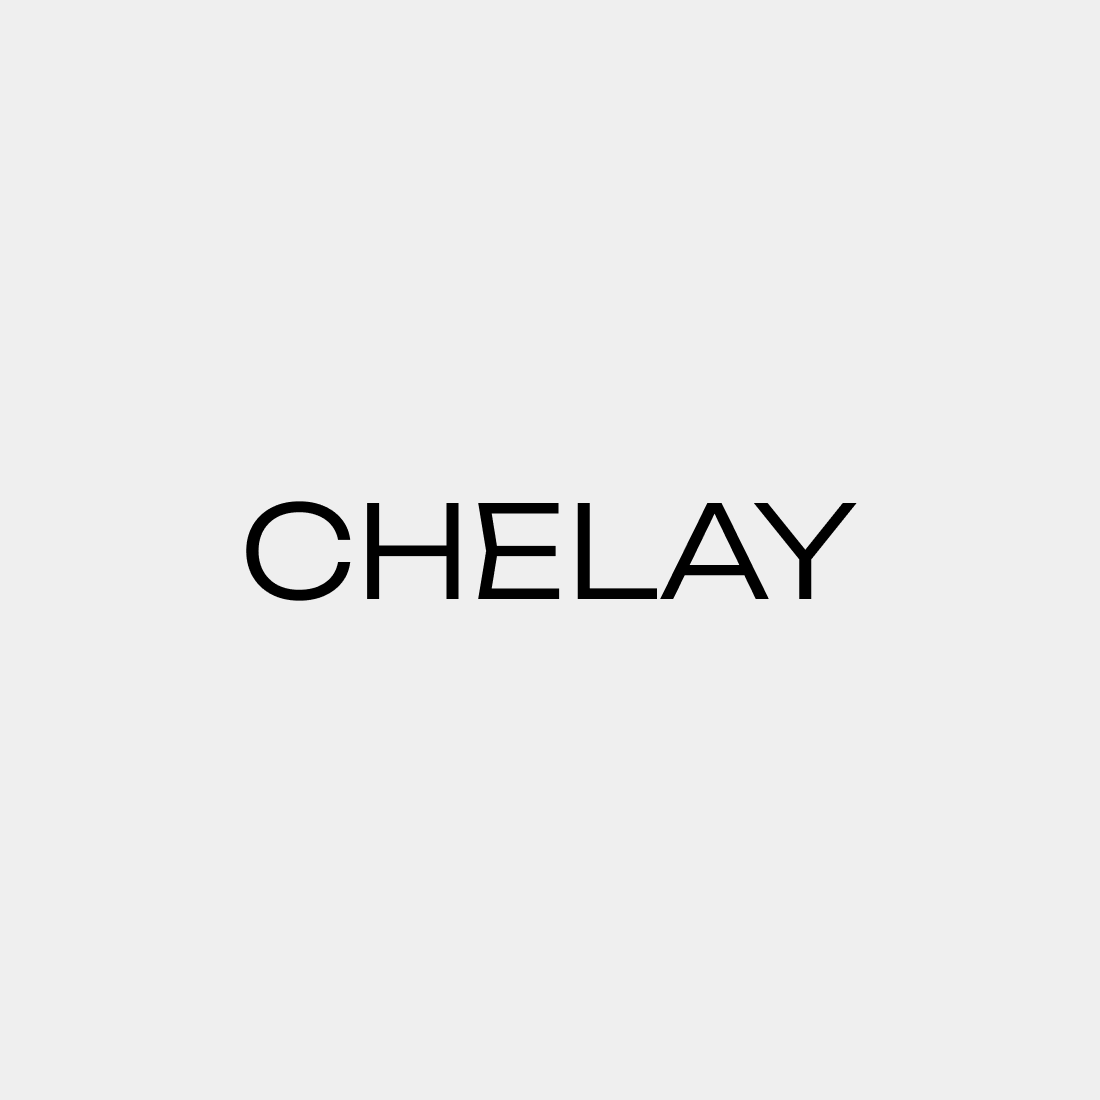 Chelay preview image.